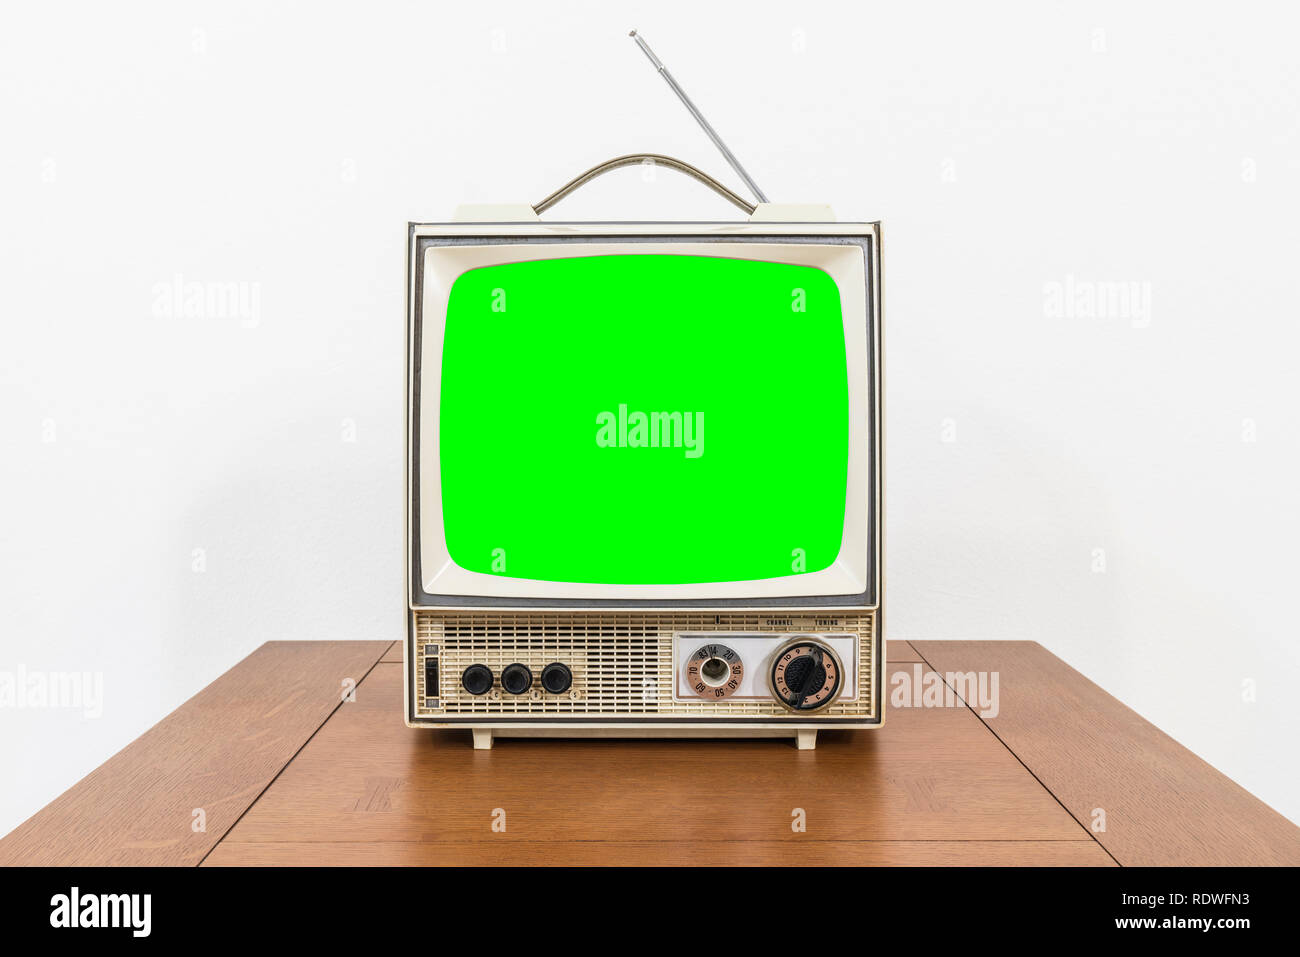 Grungy vintage portable television on table with chroma green screen. Stock Photo